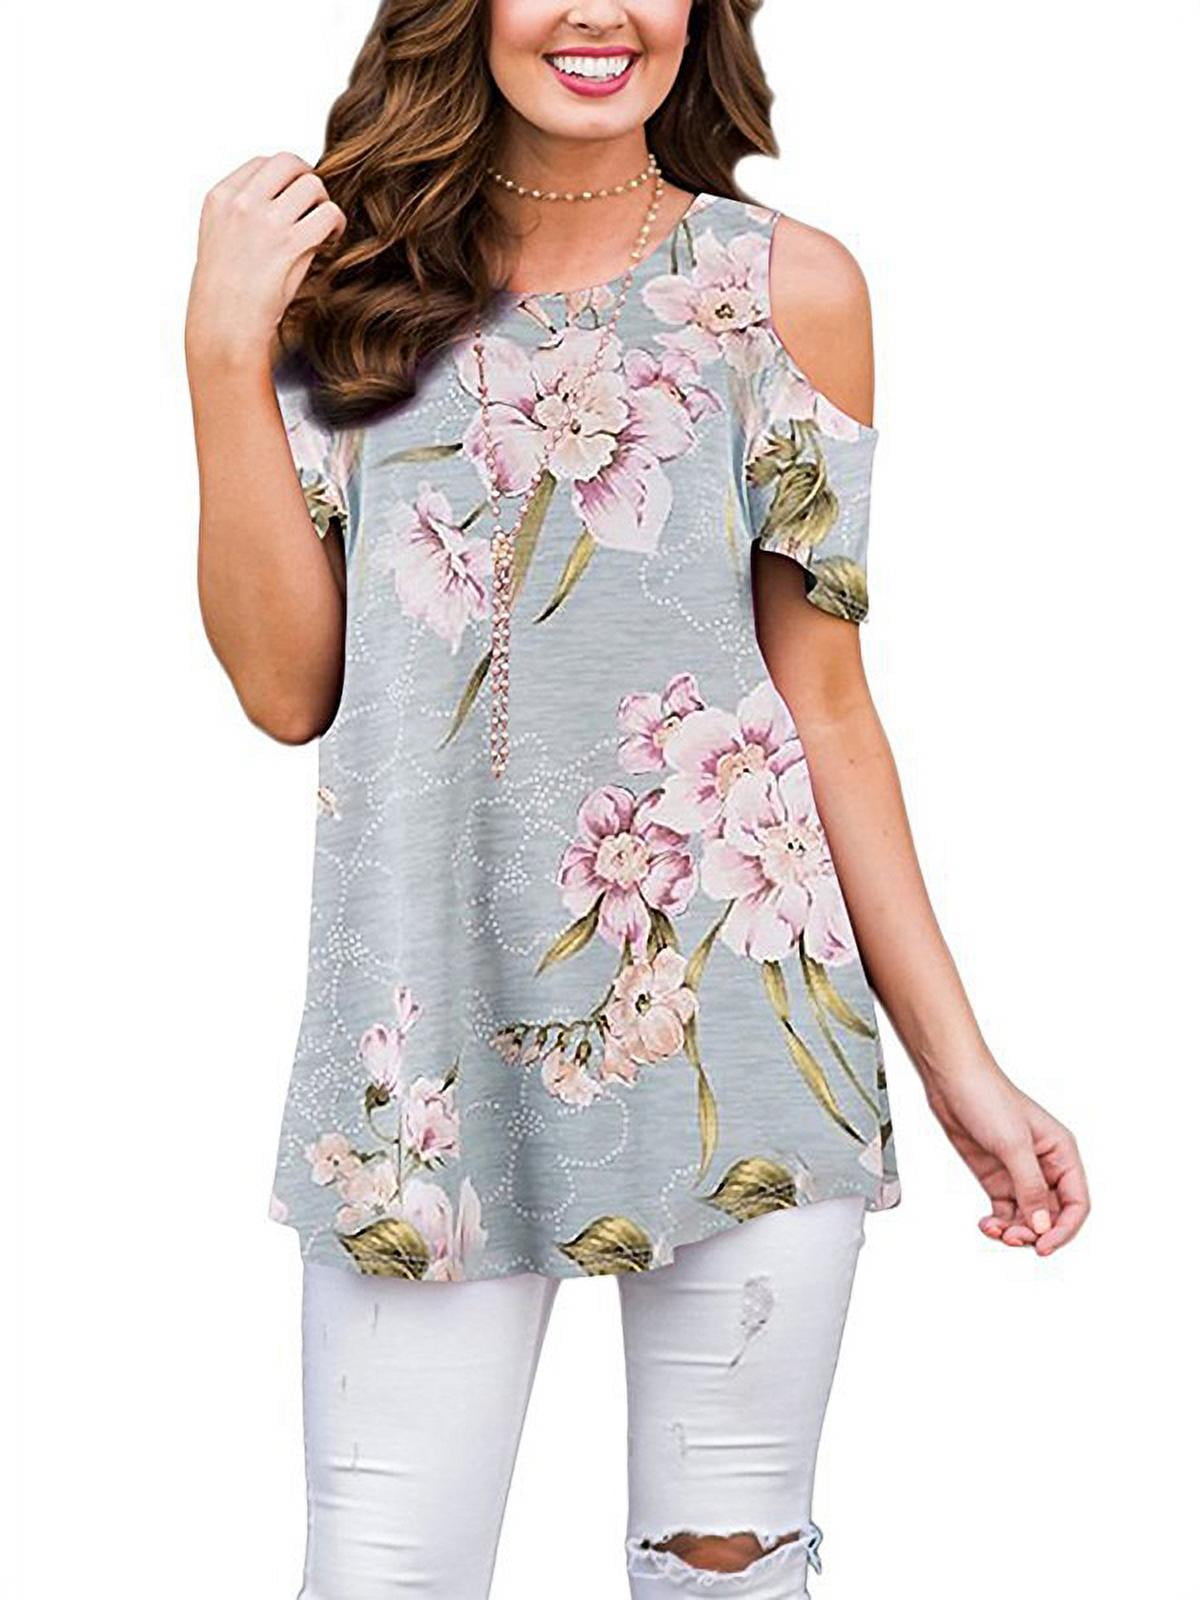 LilyLLL Womens Floral Printed Cold Shoulder Short Sleeve Blouse Shirt ...